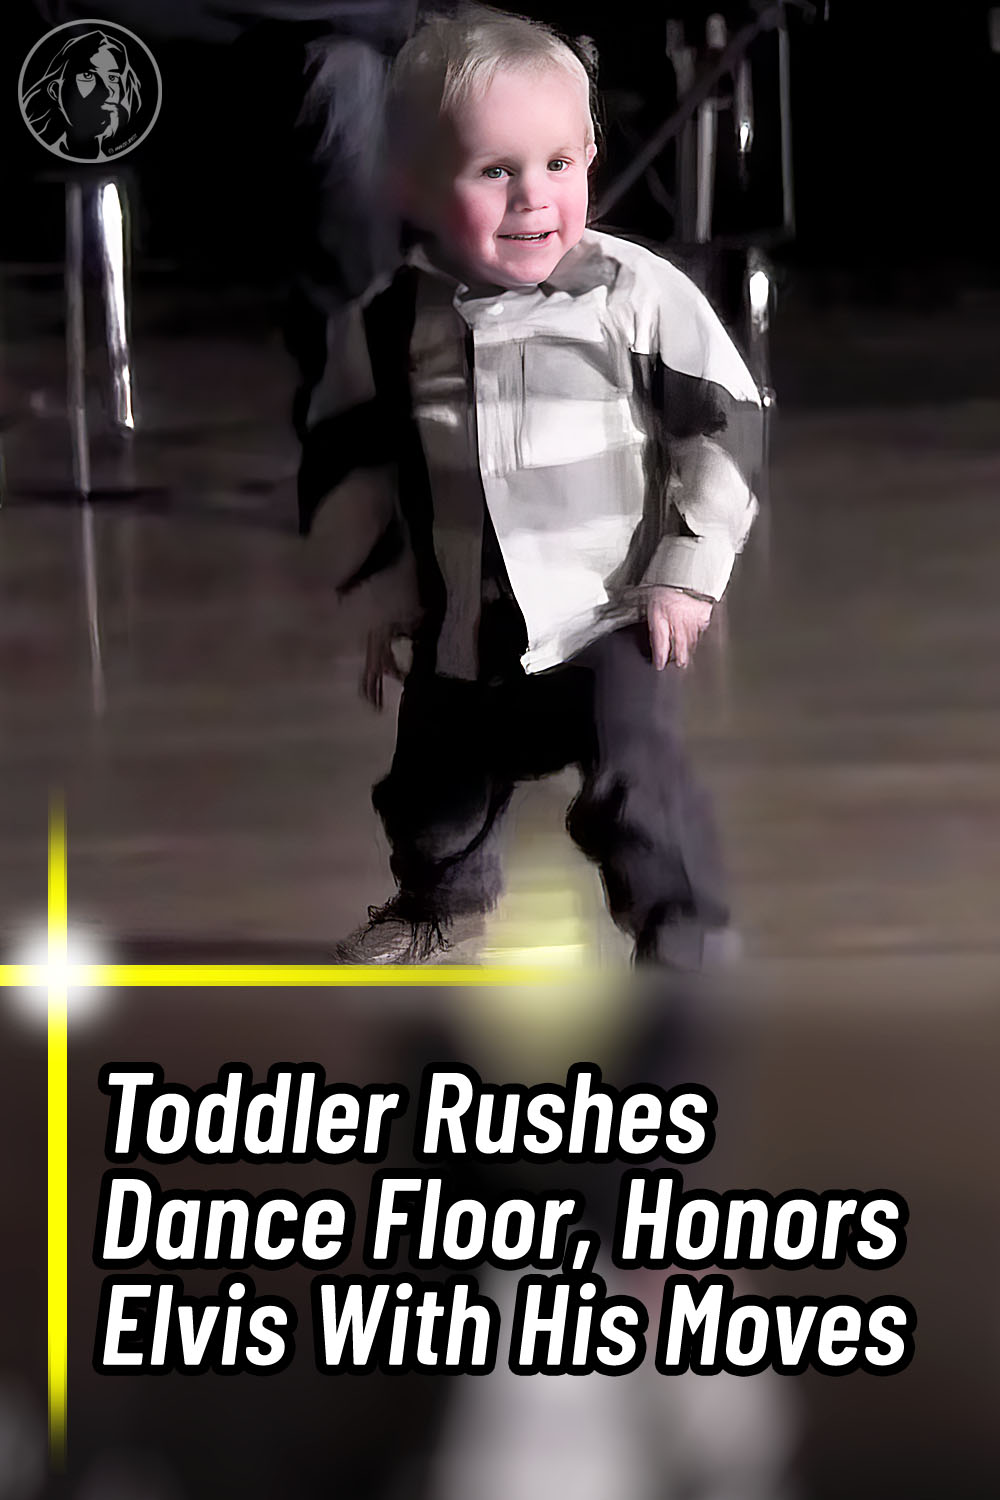 Toddler Rushes Dance Floor, Honors Elvis With His Moves